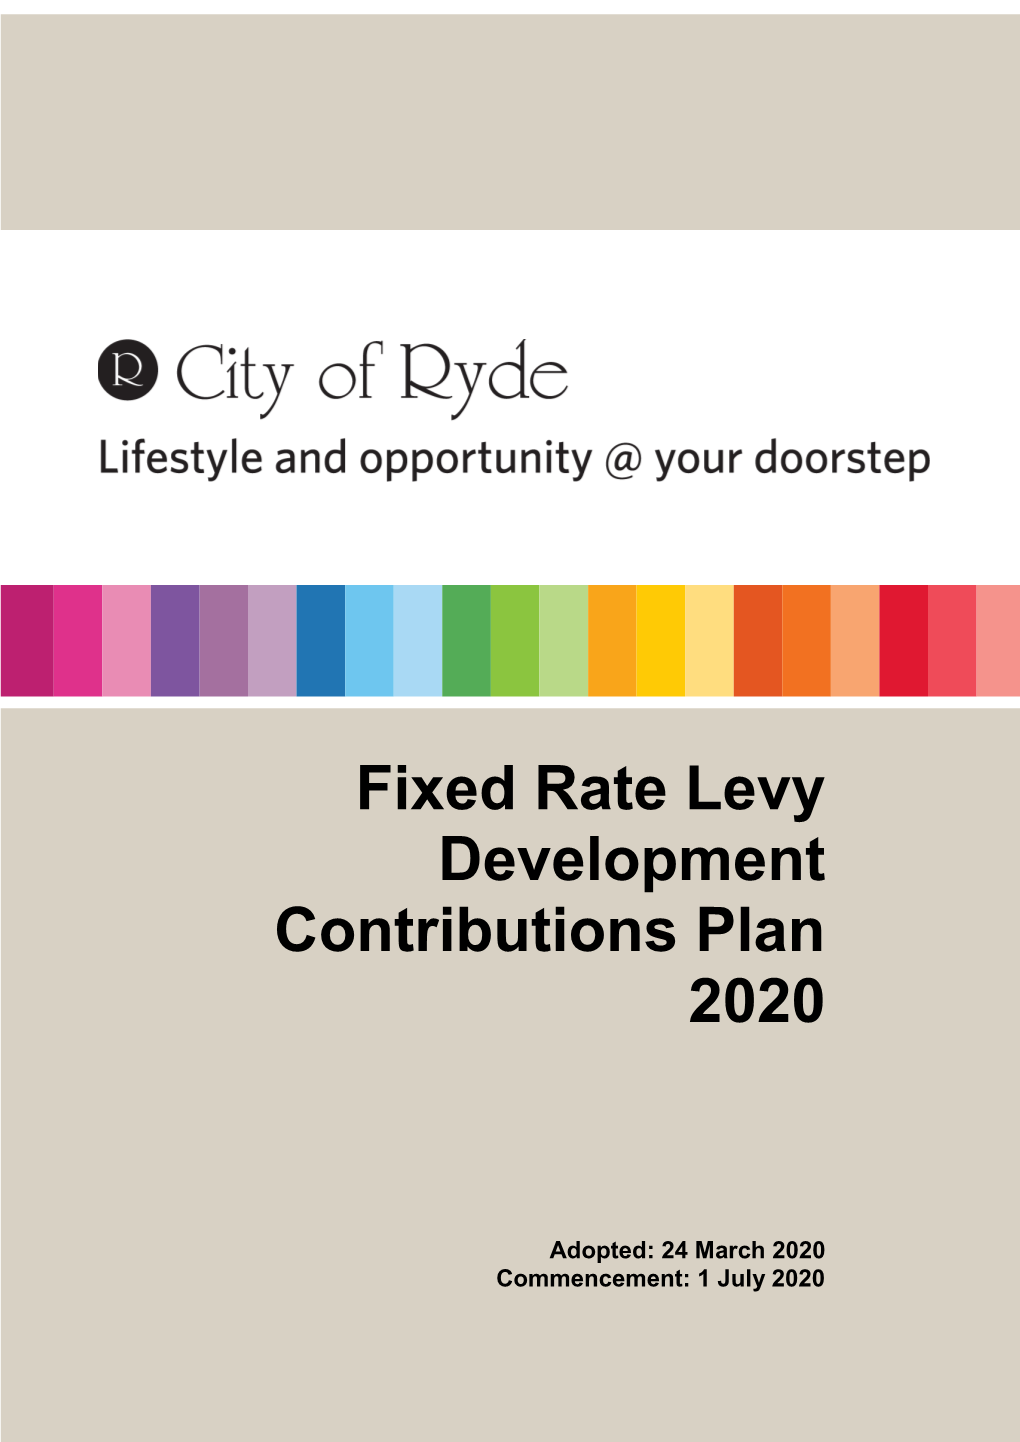 Fixed Rate Levy Development Contributions Plan 2020